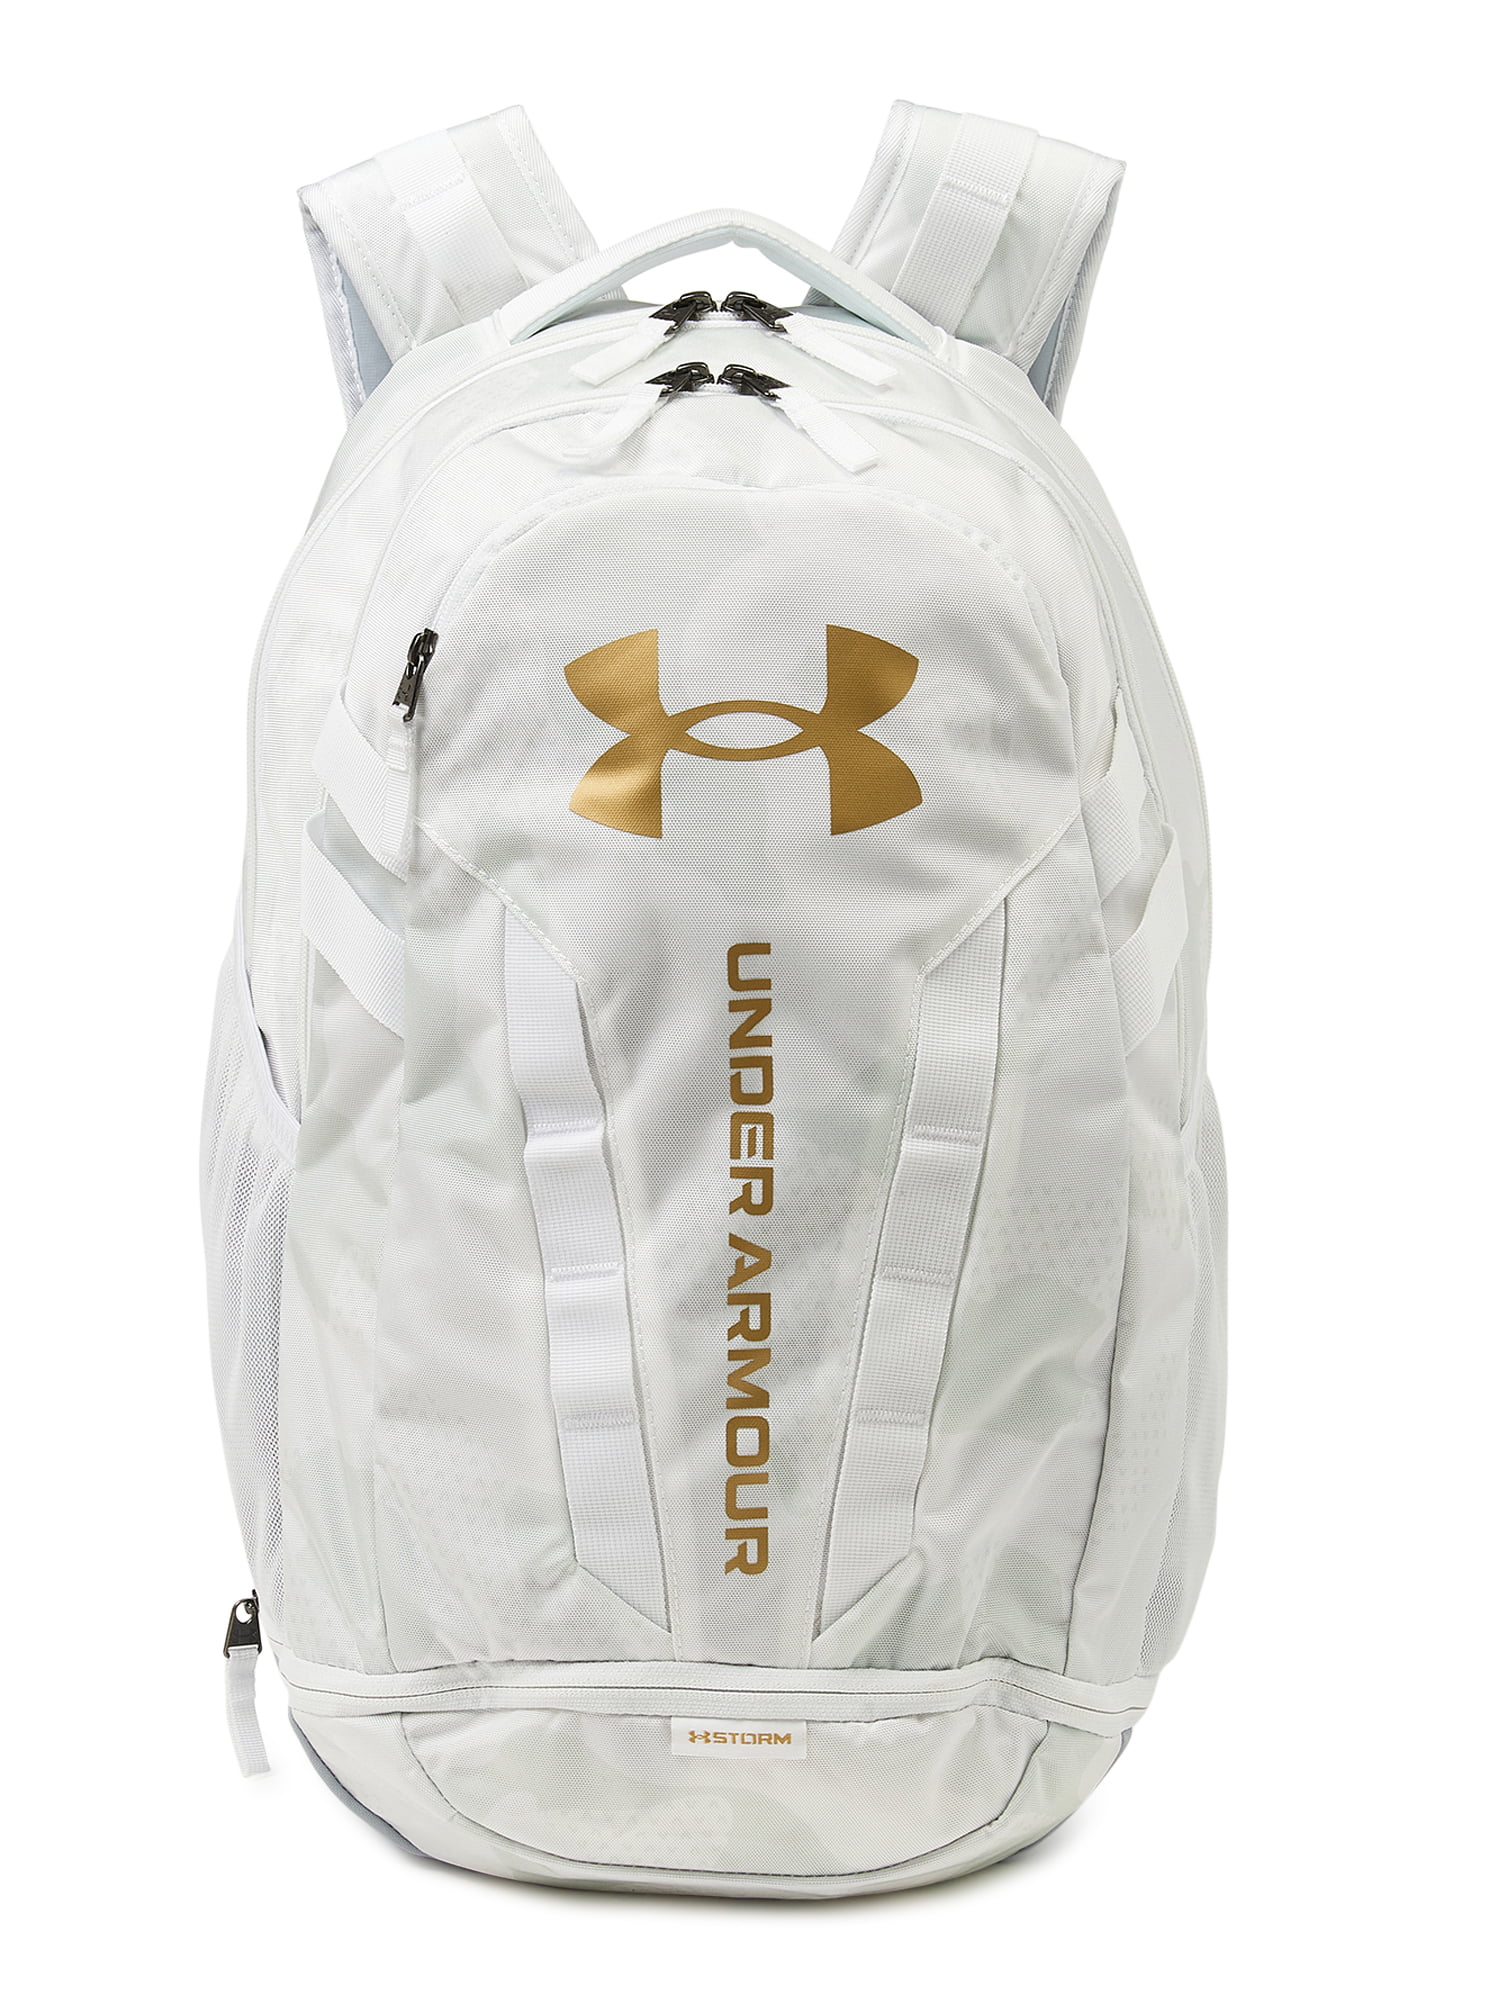 Under Armour® Hustle Play Backpack - Multiple Colors